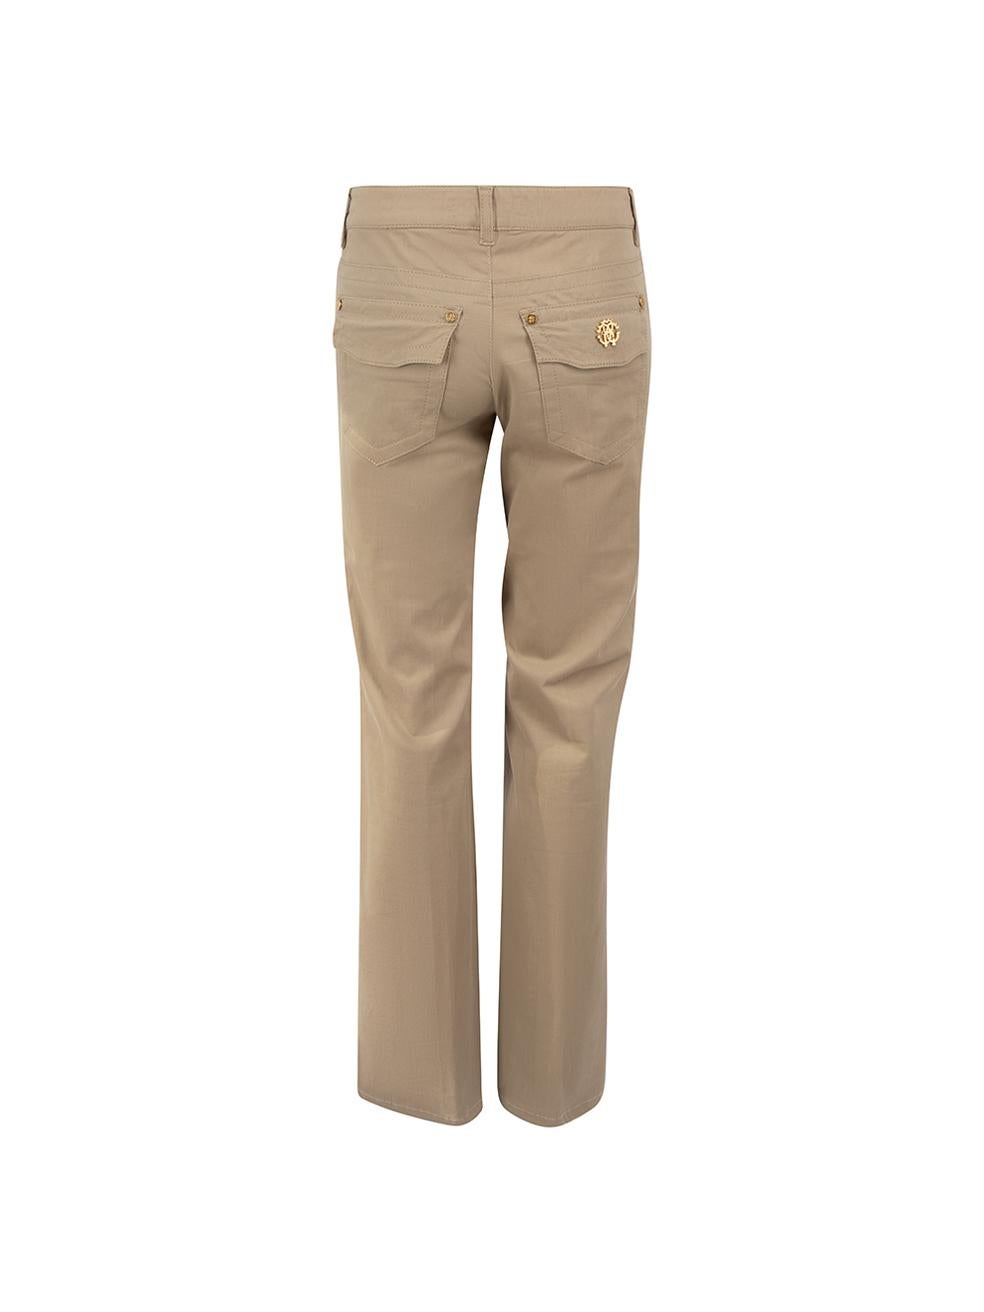 CONDITION is Very good. Hardly any visible wear to trousers is evident on this used Roberto Cavalli designer resale item.

Details
Light brown
Cotton
Trousers
Flared
Mid rise
Gold tone hardware
3x Front pockets
2x Back pockets
Fly zip and button